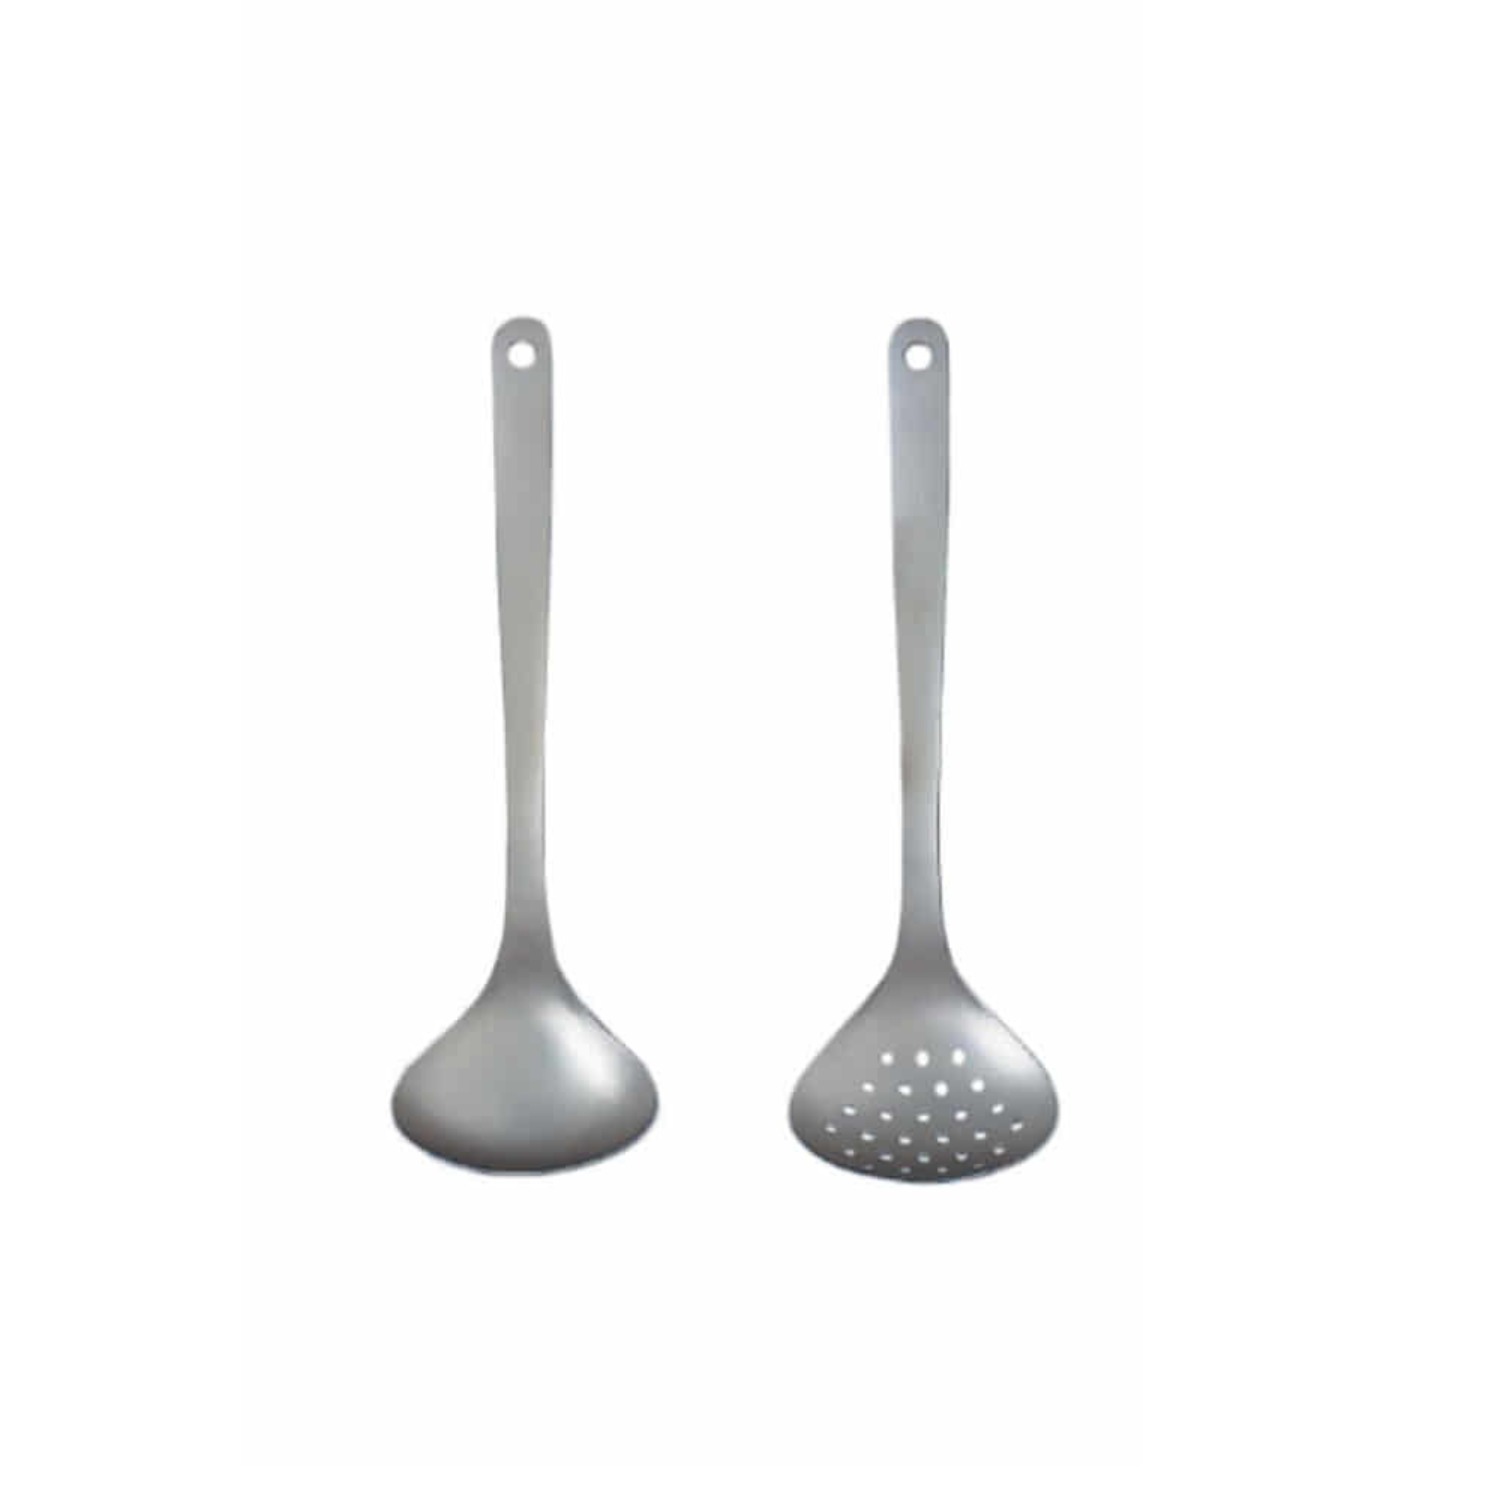 ﻿Stainless Steel Kitchen Tools - Laddle/Skimmer